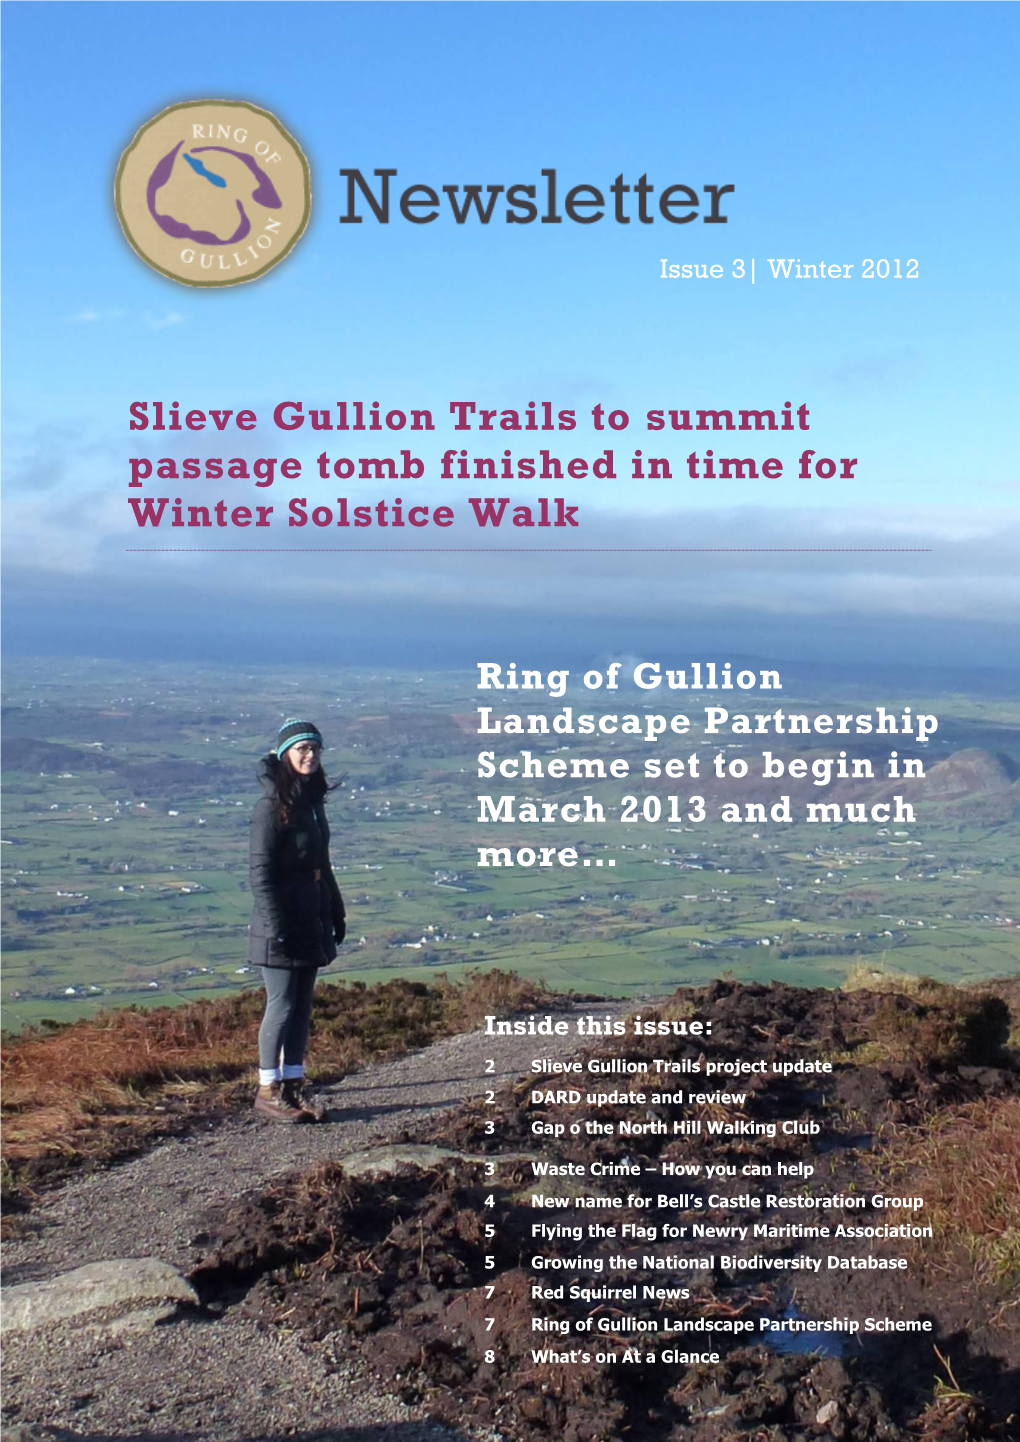 Slieve Gullion Trails to Summit Passage Tomb Finished in Time For